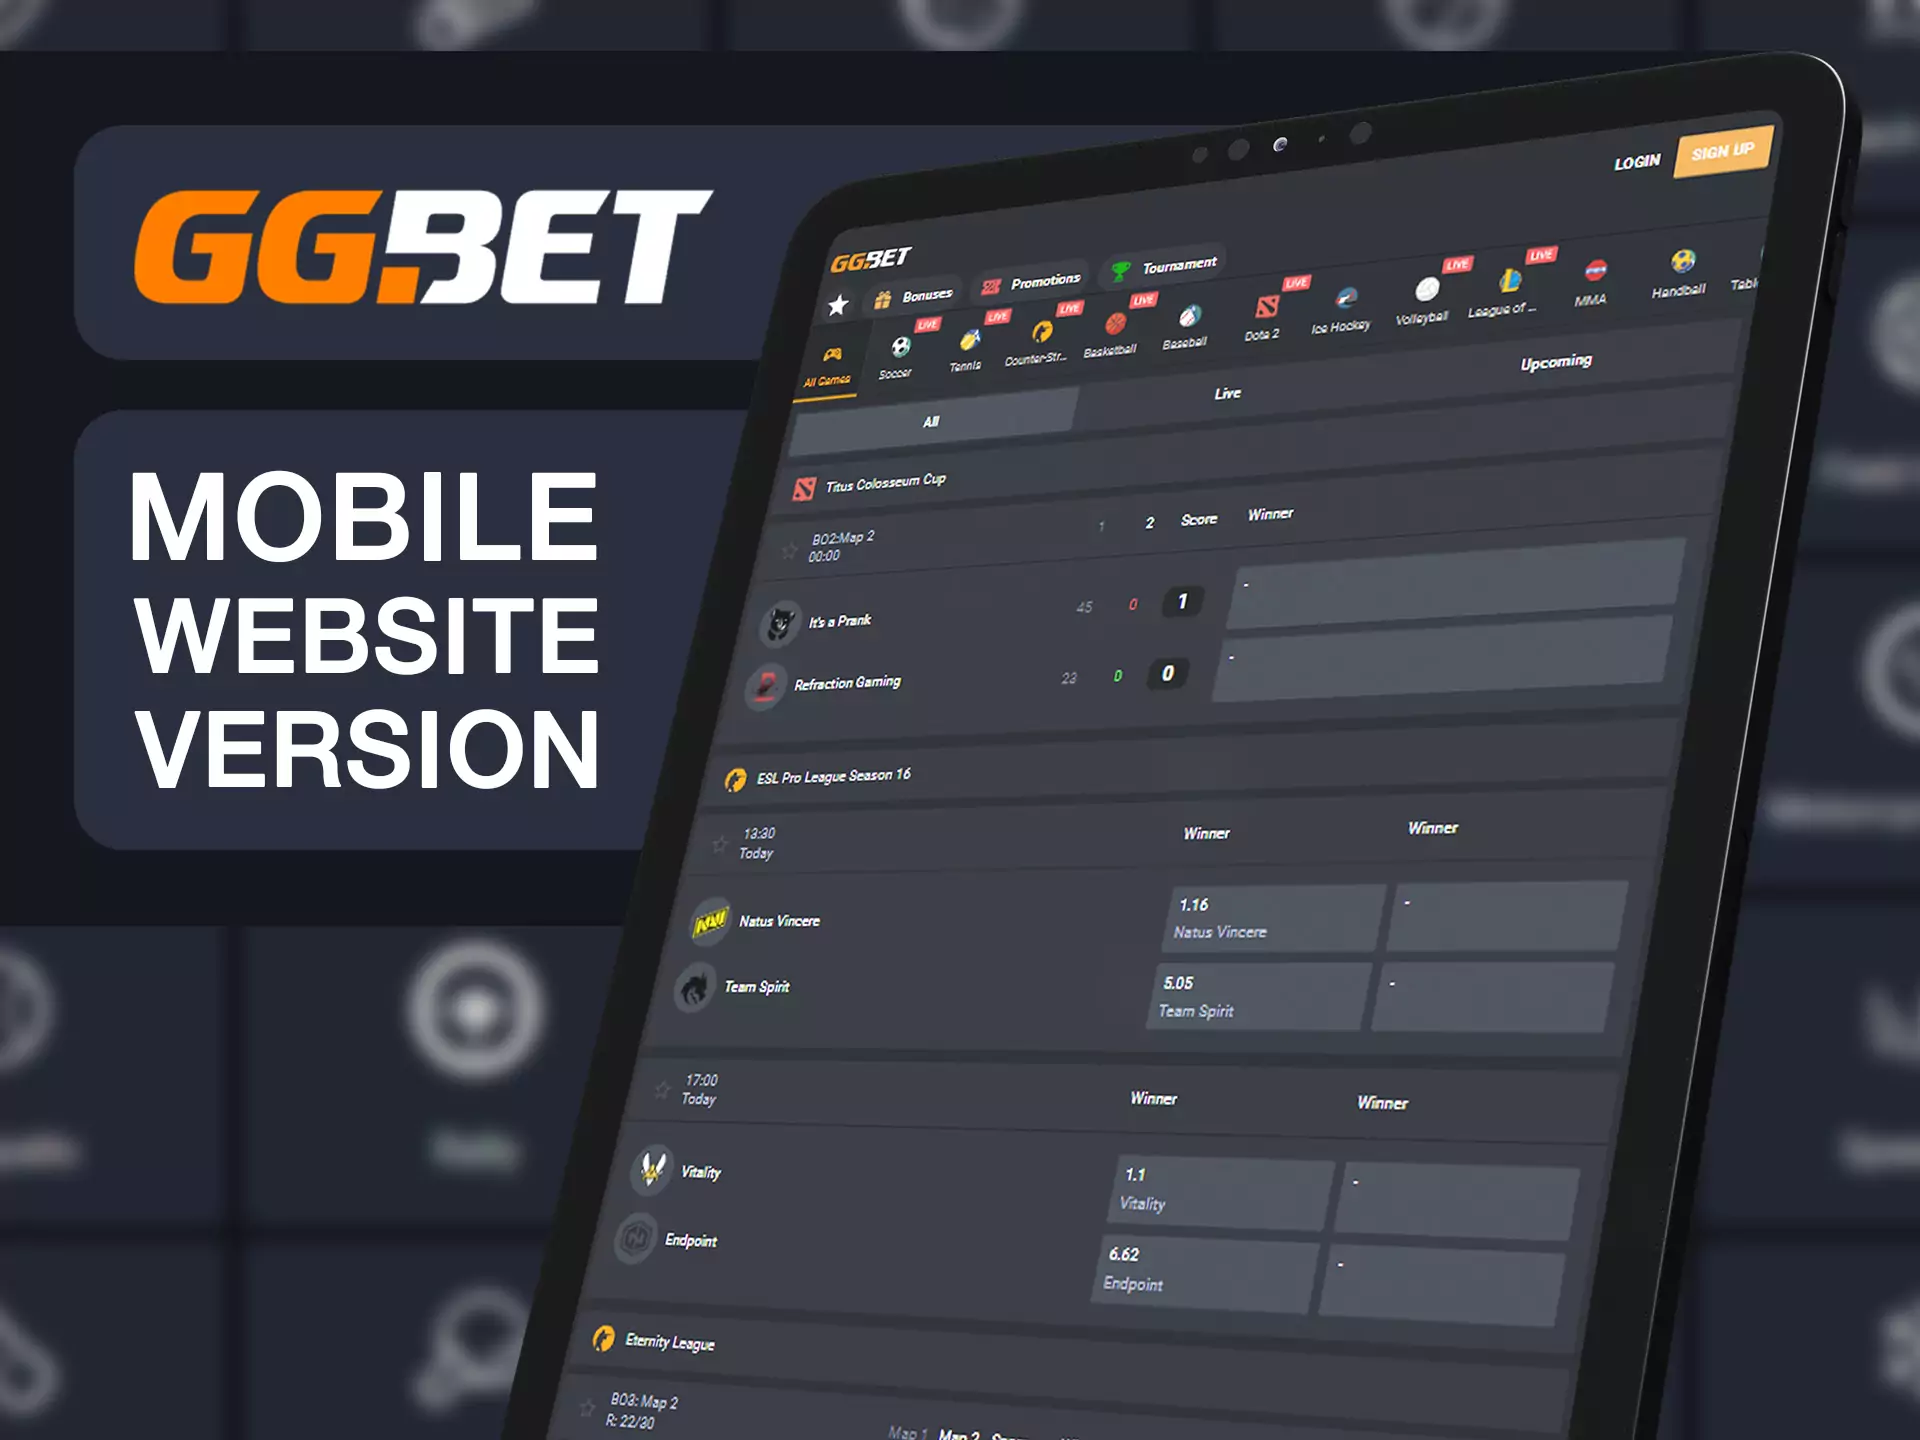 Use most convinient version of GGBet website.